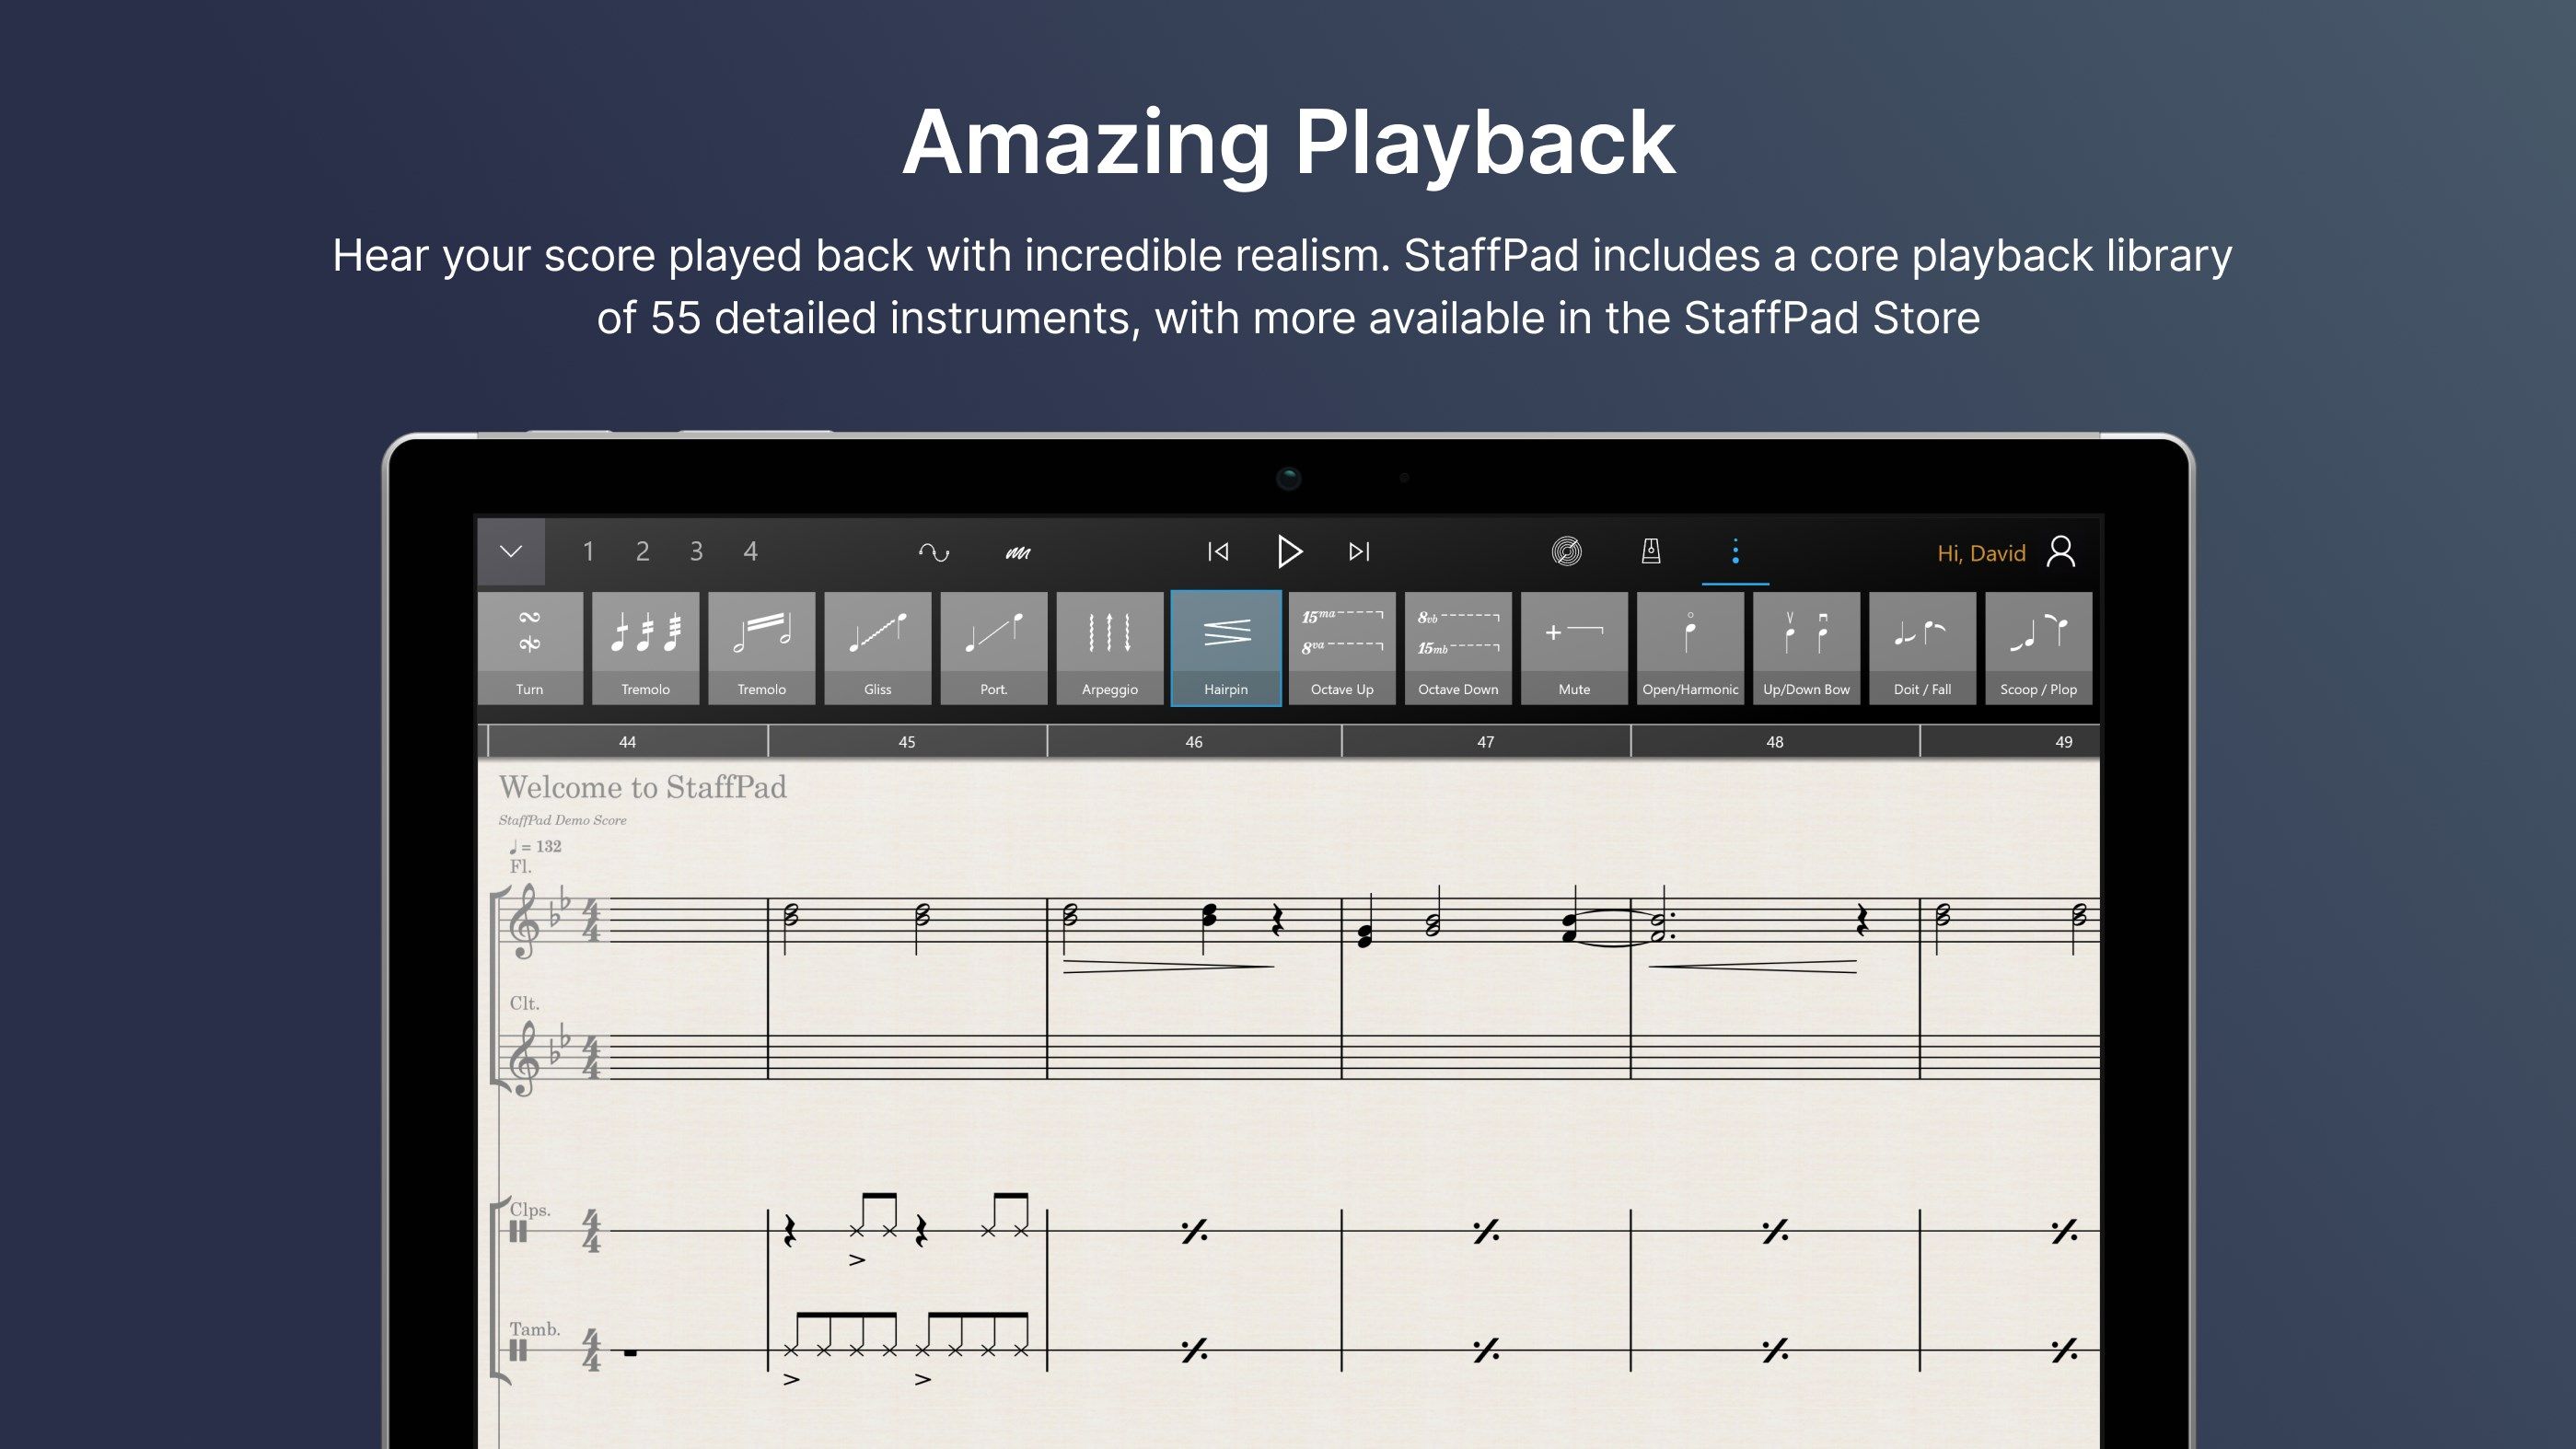 Amazing Playback: Hear your score played back with incredible realism. StaffPad includes a core playback library of 55 detailed instruments, with more available in the StaffPad Store